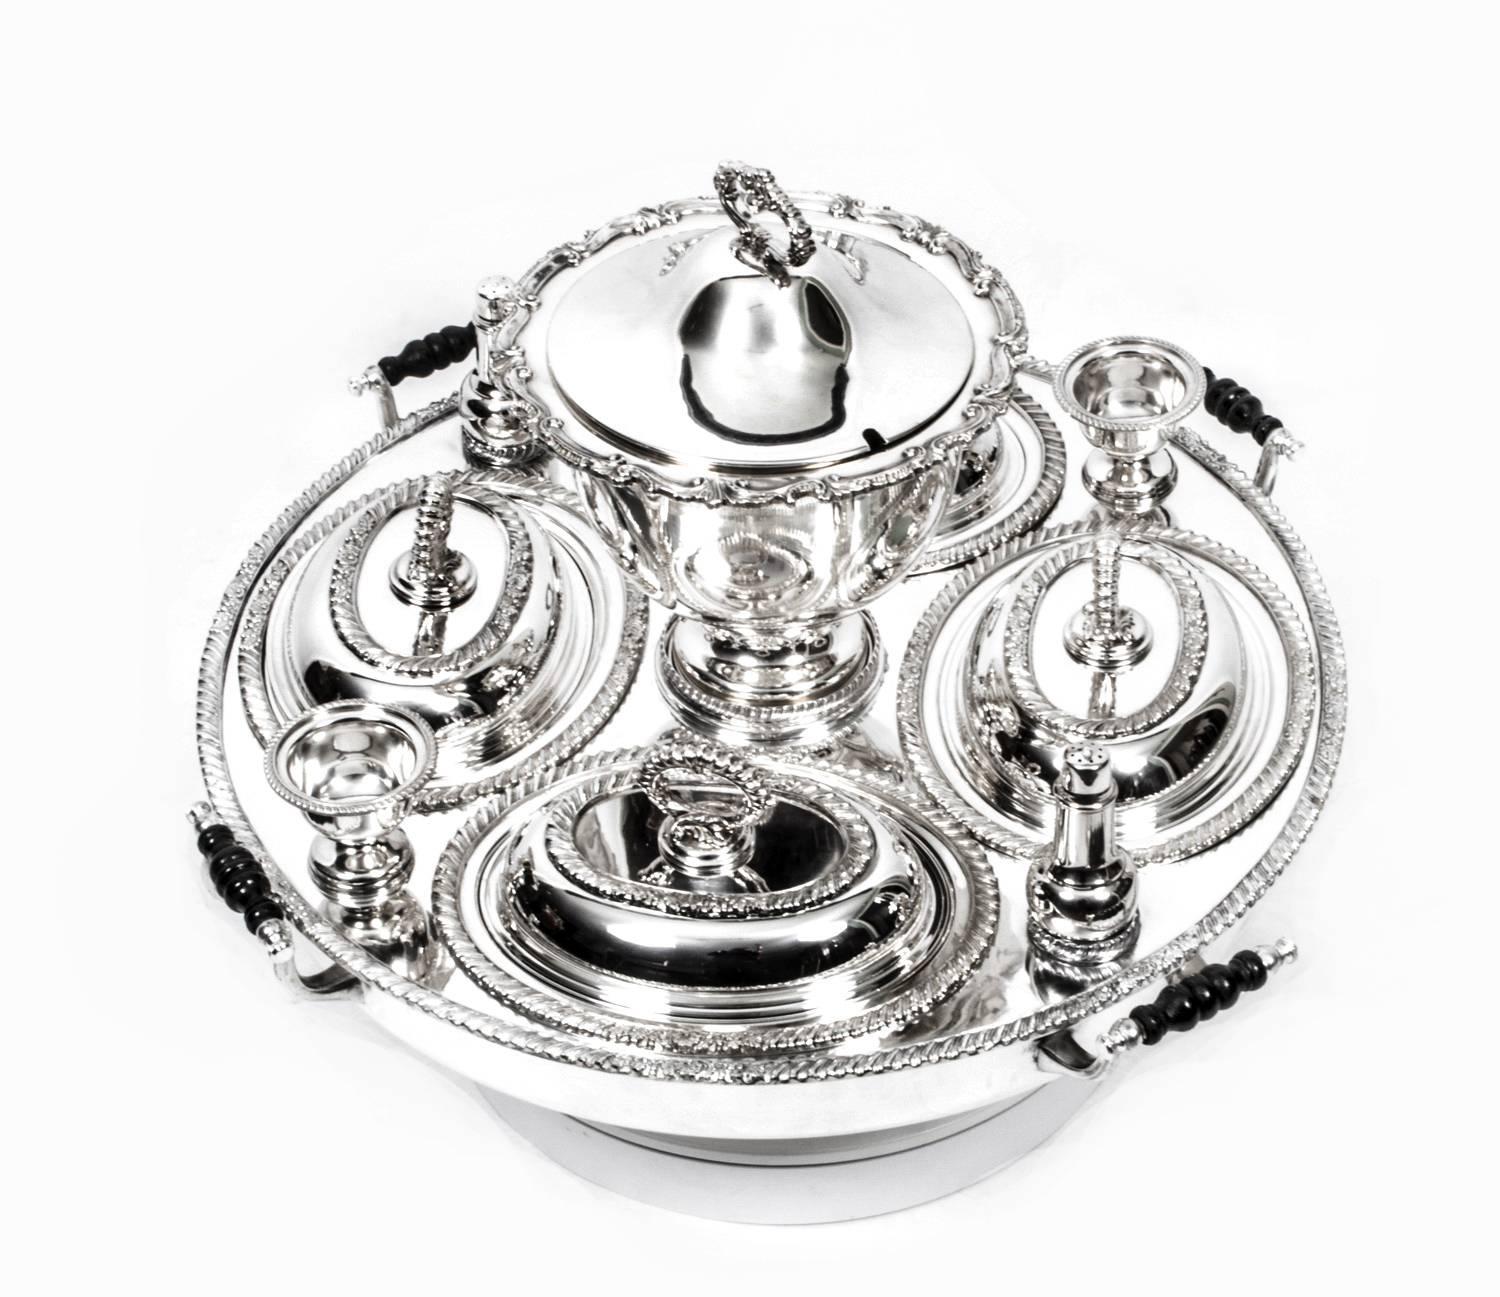 This is a superb antique American silver plated "Lazy Susan," which is a rotating serving tray, dating from the 1920s.

This versatile piece features four lidded entree dishes, a pair of salts and a pair of pepper shakers, as well as a